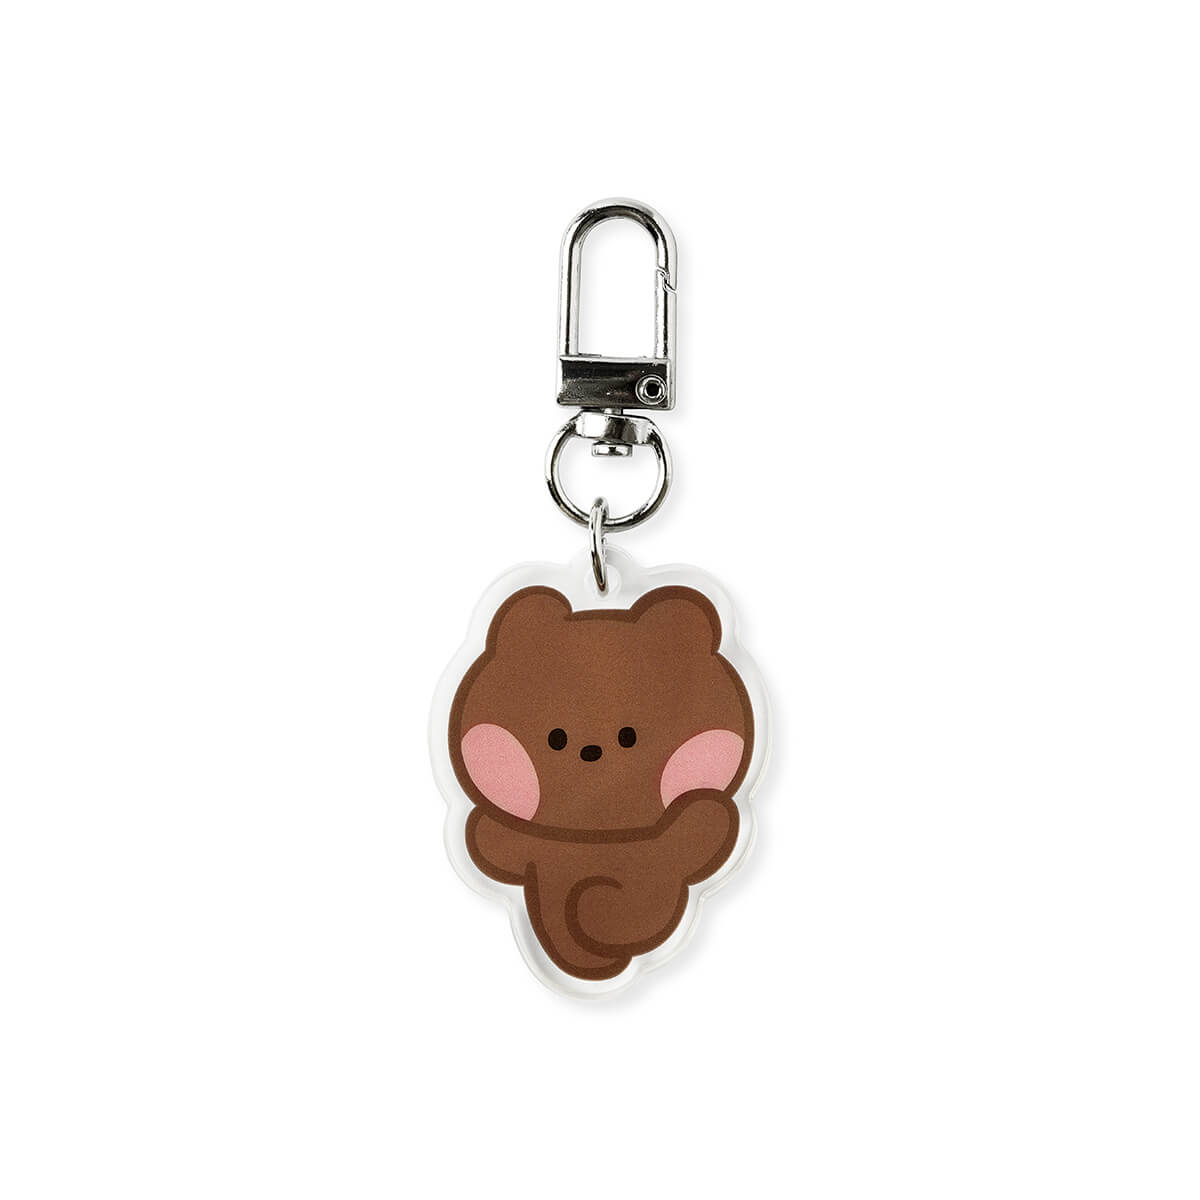 LINE FRIENDS BROWN with LHiDS Magnetic Modular Planner - LINE FRIENDS_US